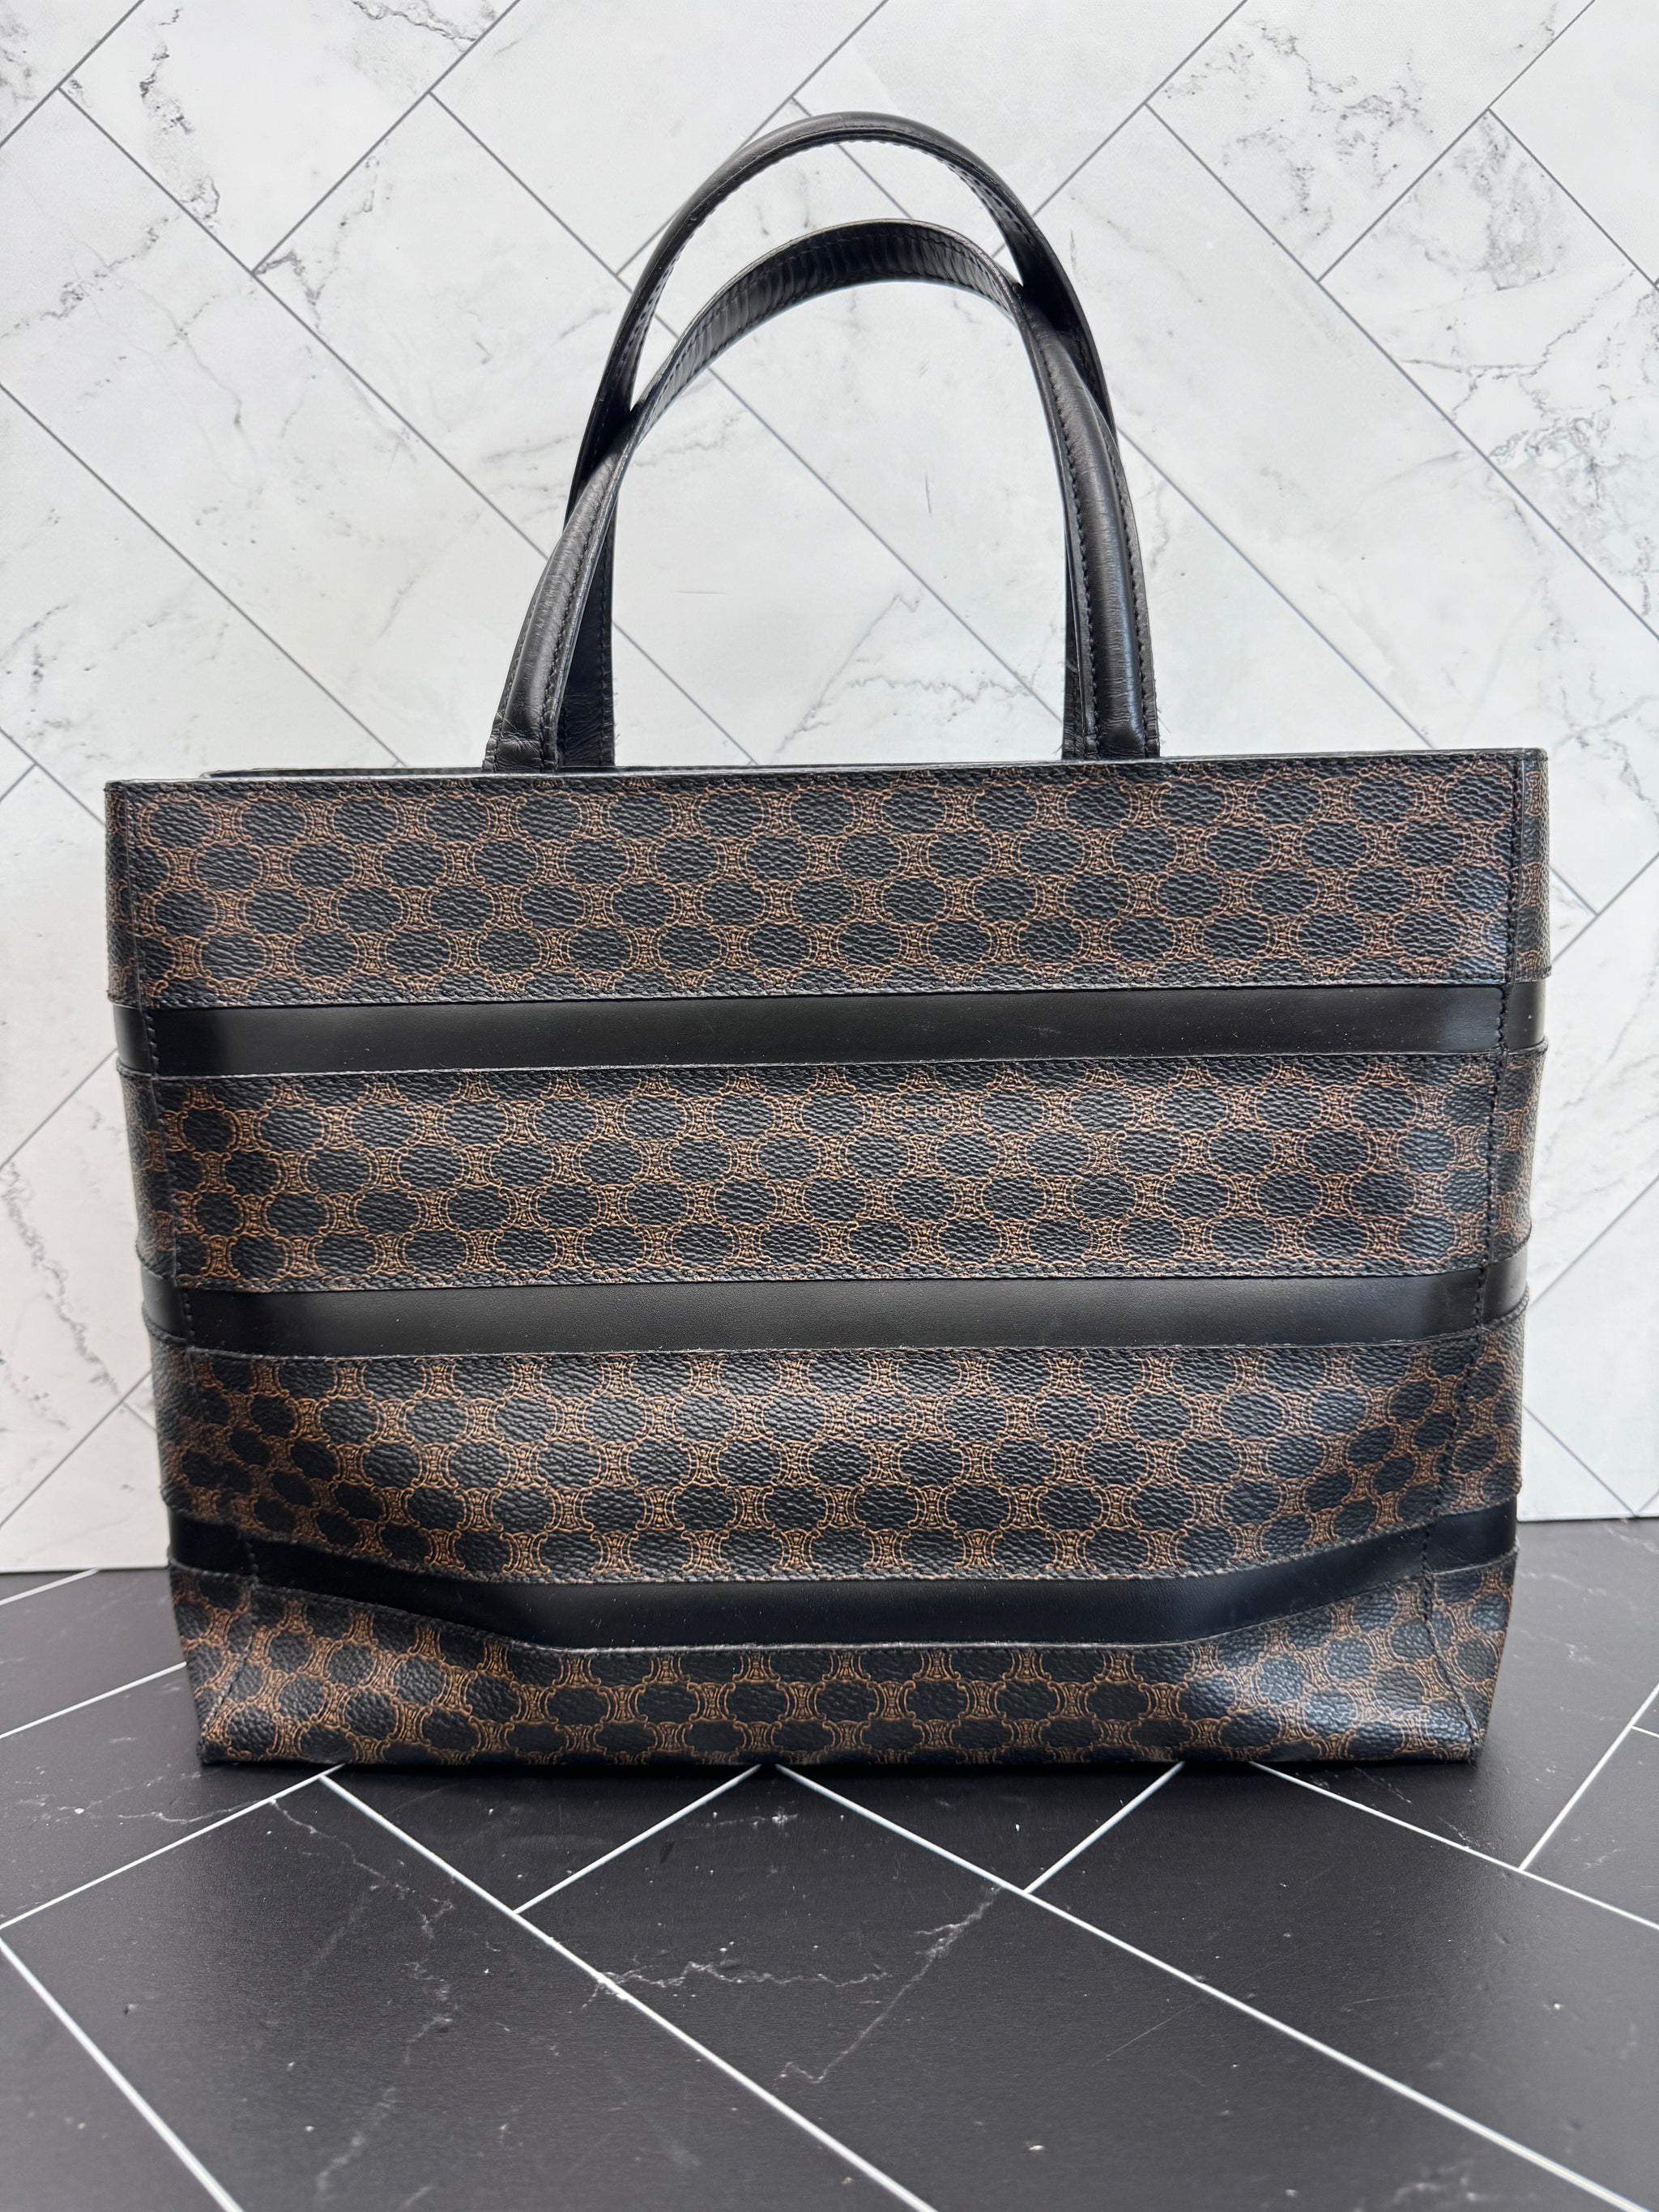 Celine Black and Brown Honeycomb Coated Canvas Tote Bag